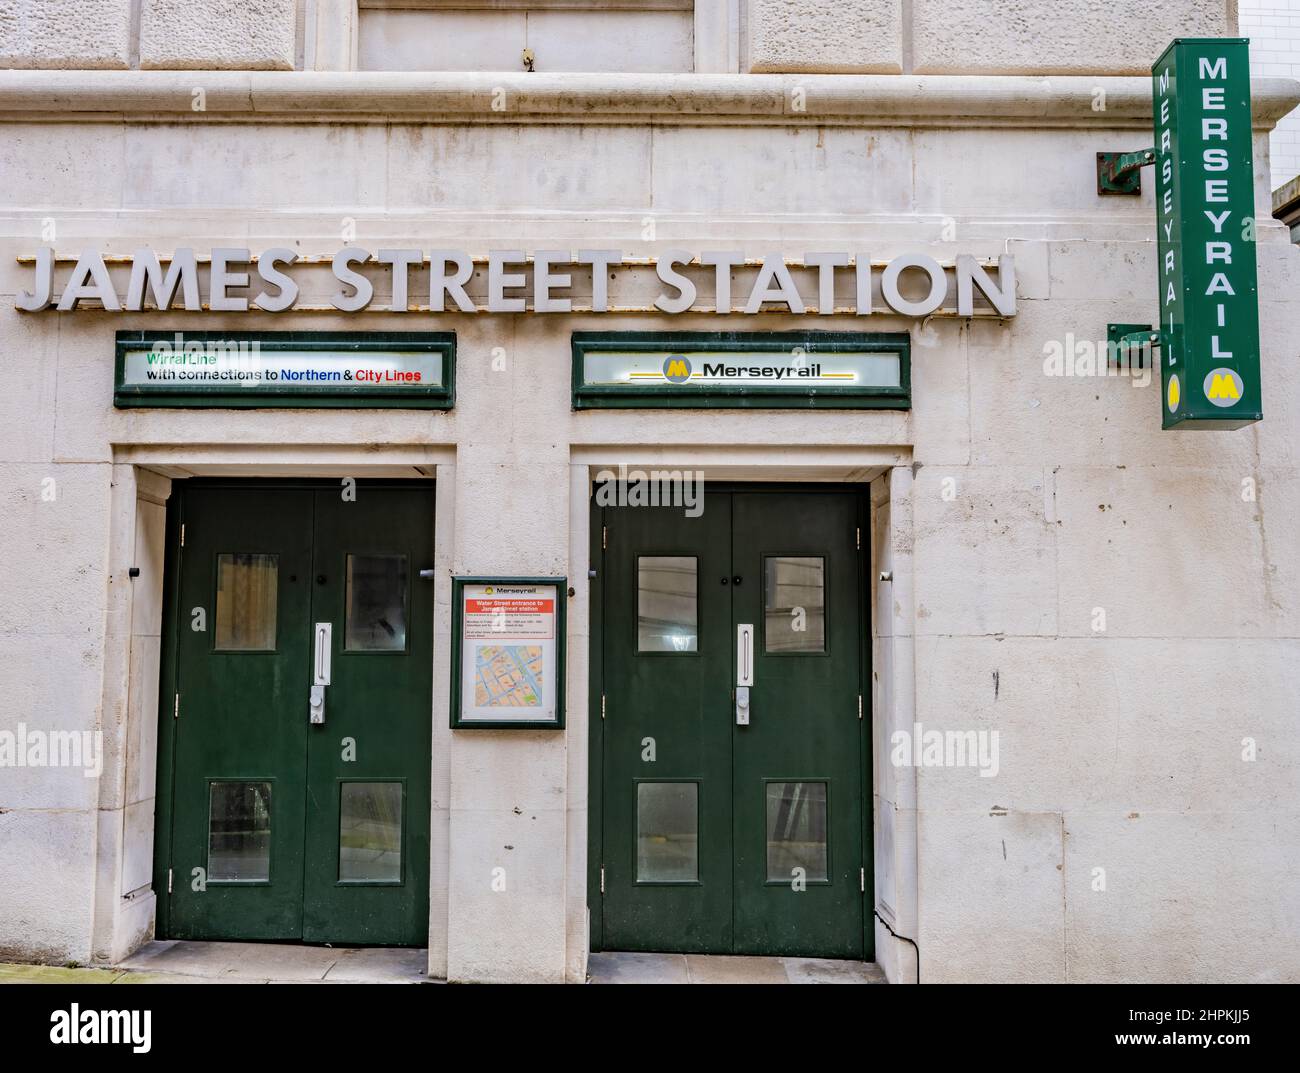 James Street Station, The India Building, Water street, Liverpool, Nortern & City Lines, Northern Line, City Line, Mersey Rail, Stock Photo